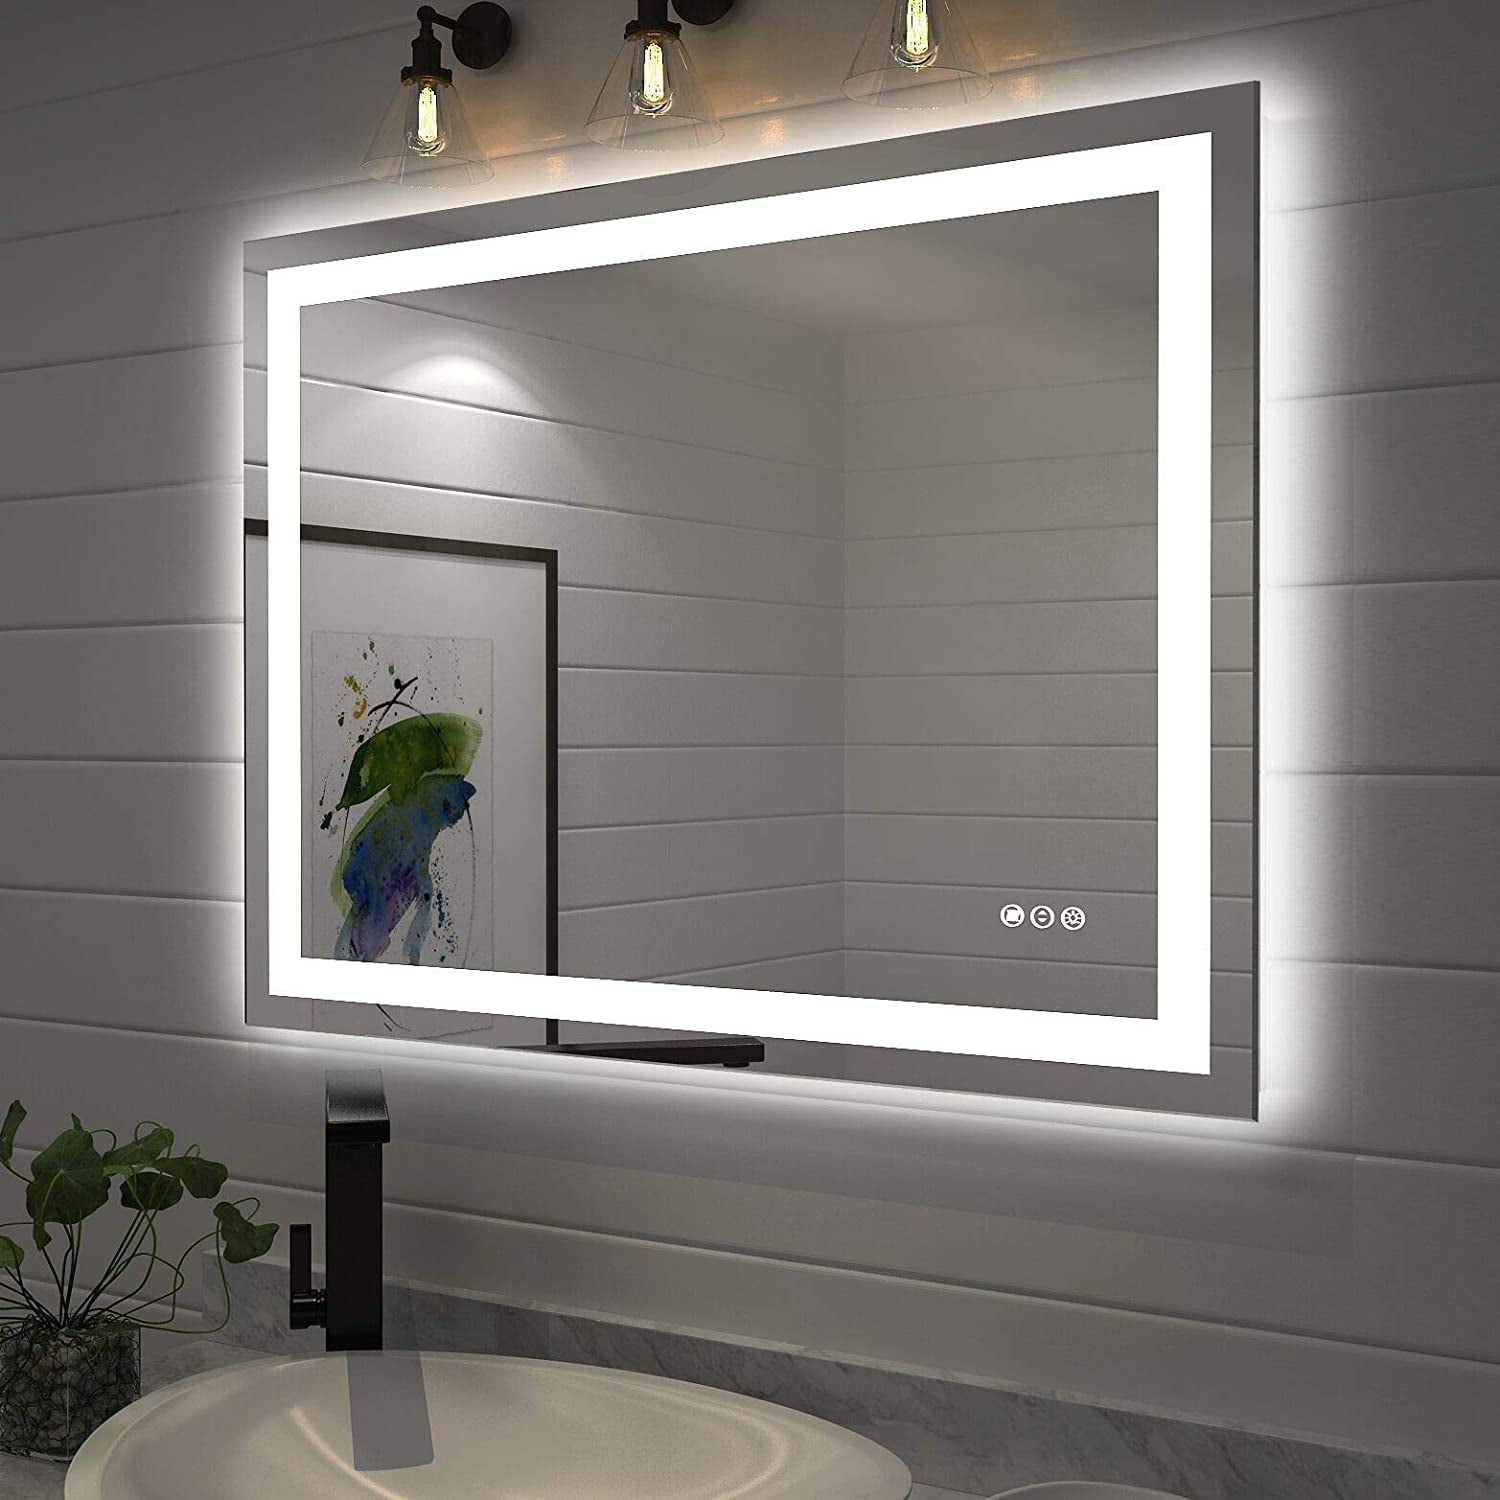 JSTCL Bathroom 40"x 32" with Front and BacklitStepless Dimmable Mirrors with Anti-FogShatter-ProofMemory3 ColorsDouble LED Vanity Mirror (Horizontal/Vertical) Walmart.com